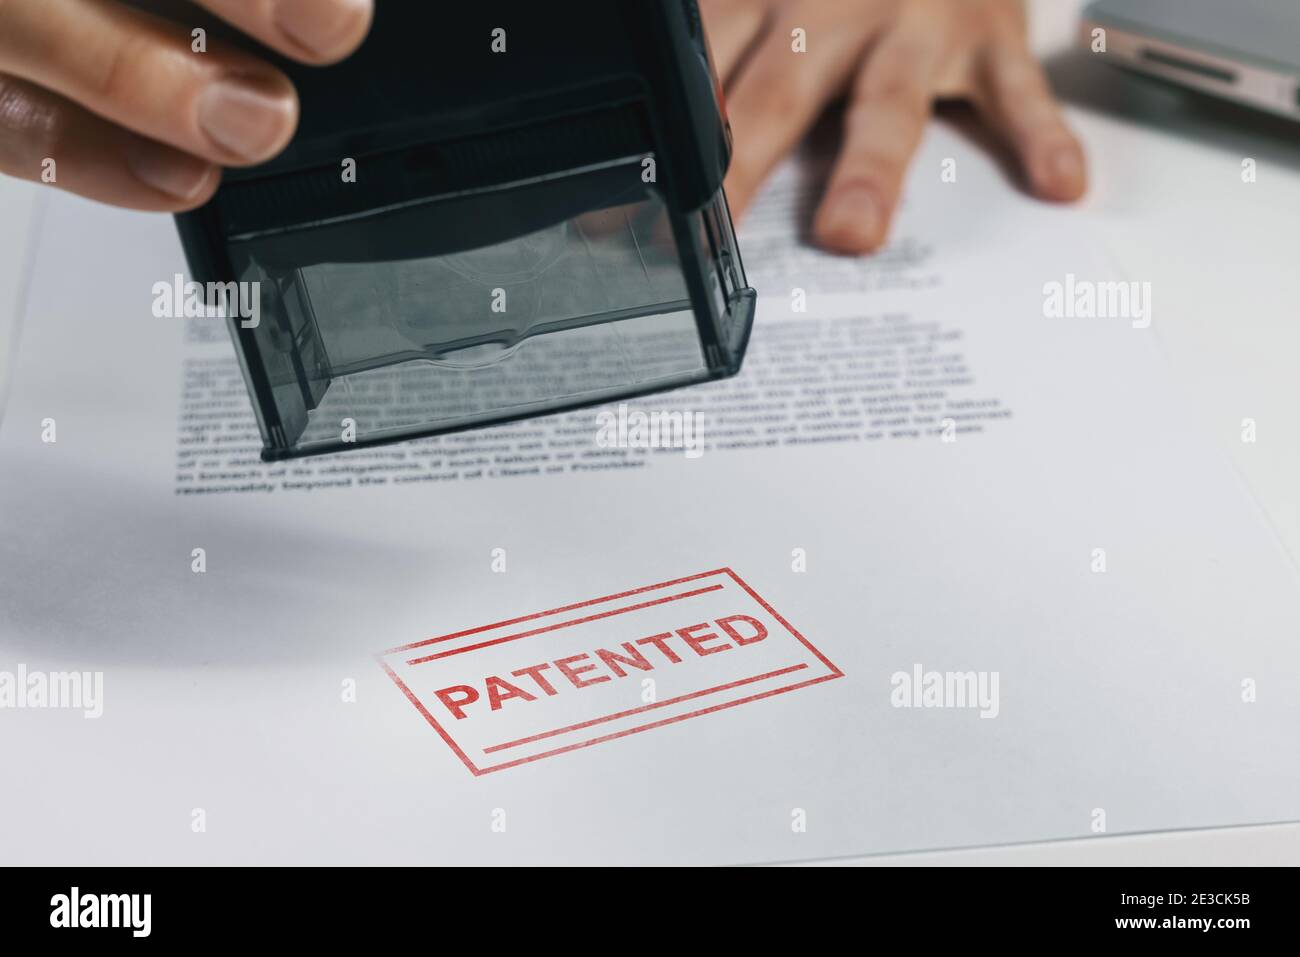 put a patented stamp on document. intellectual property protection Stock Photo